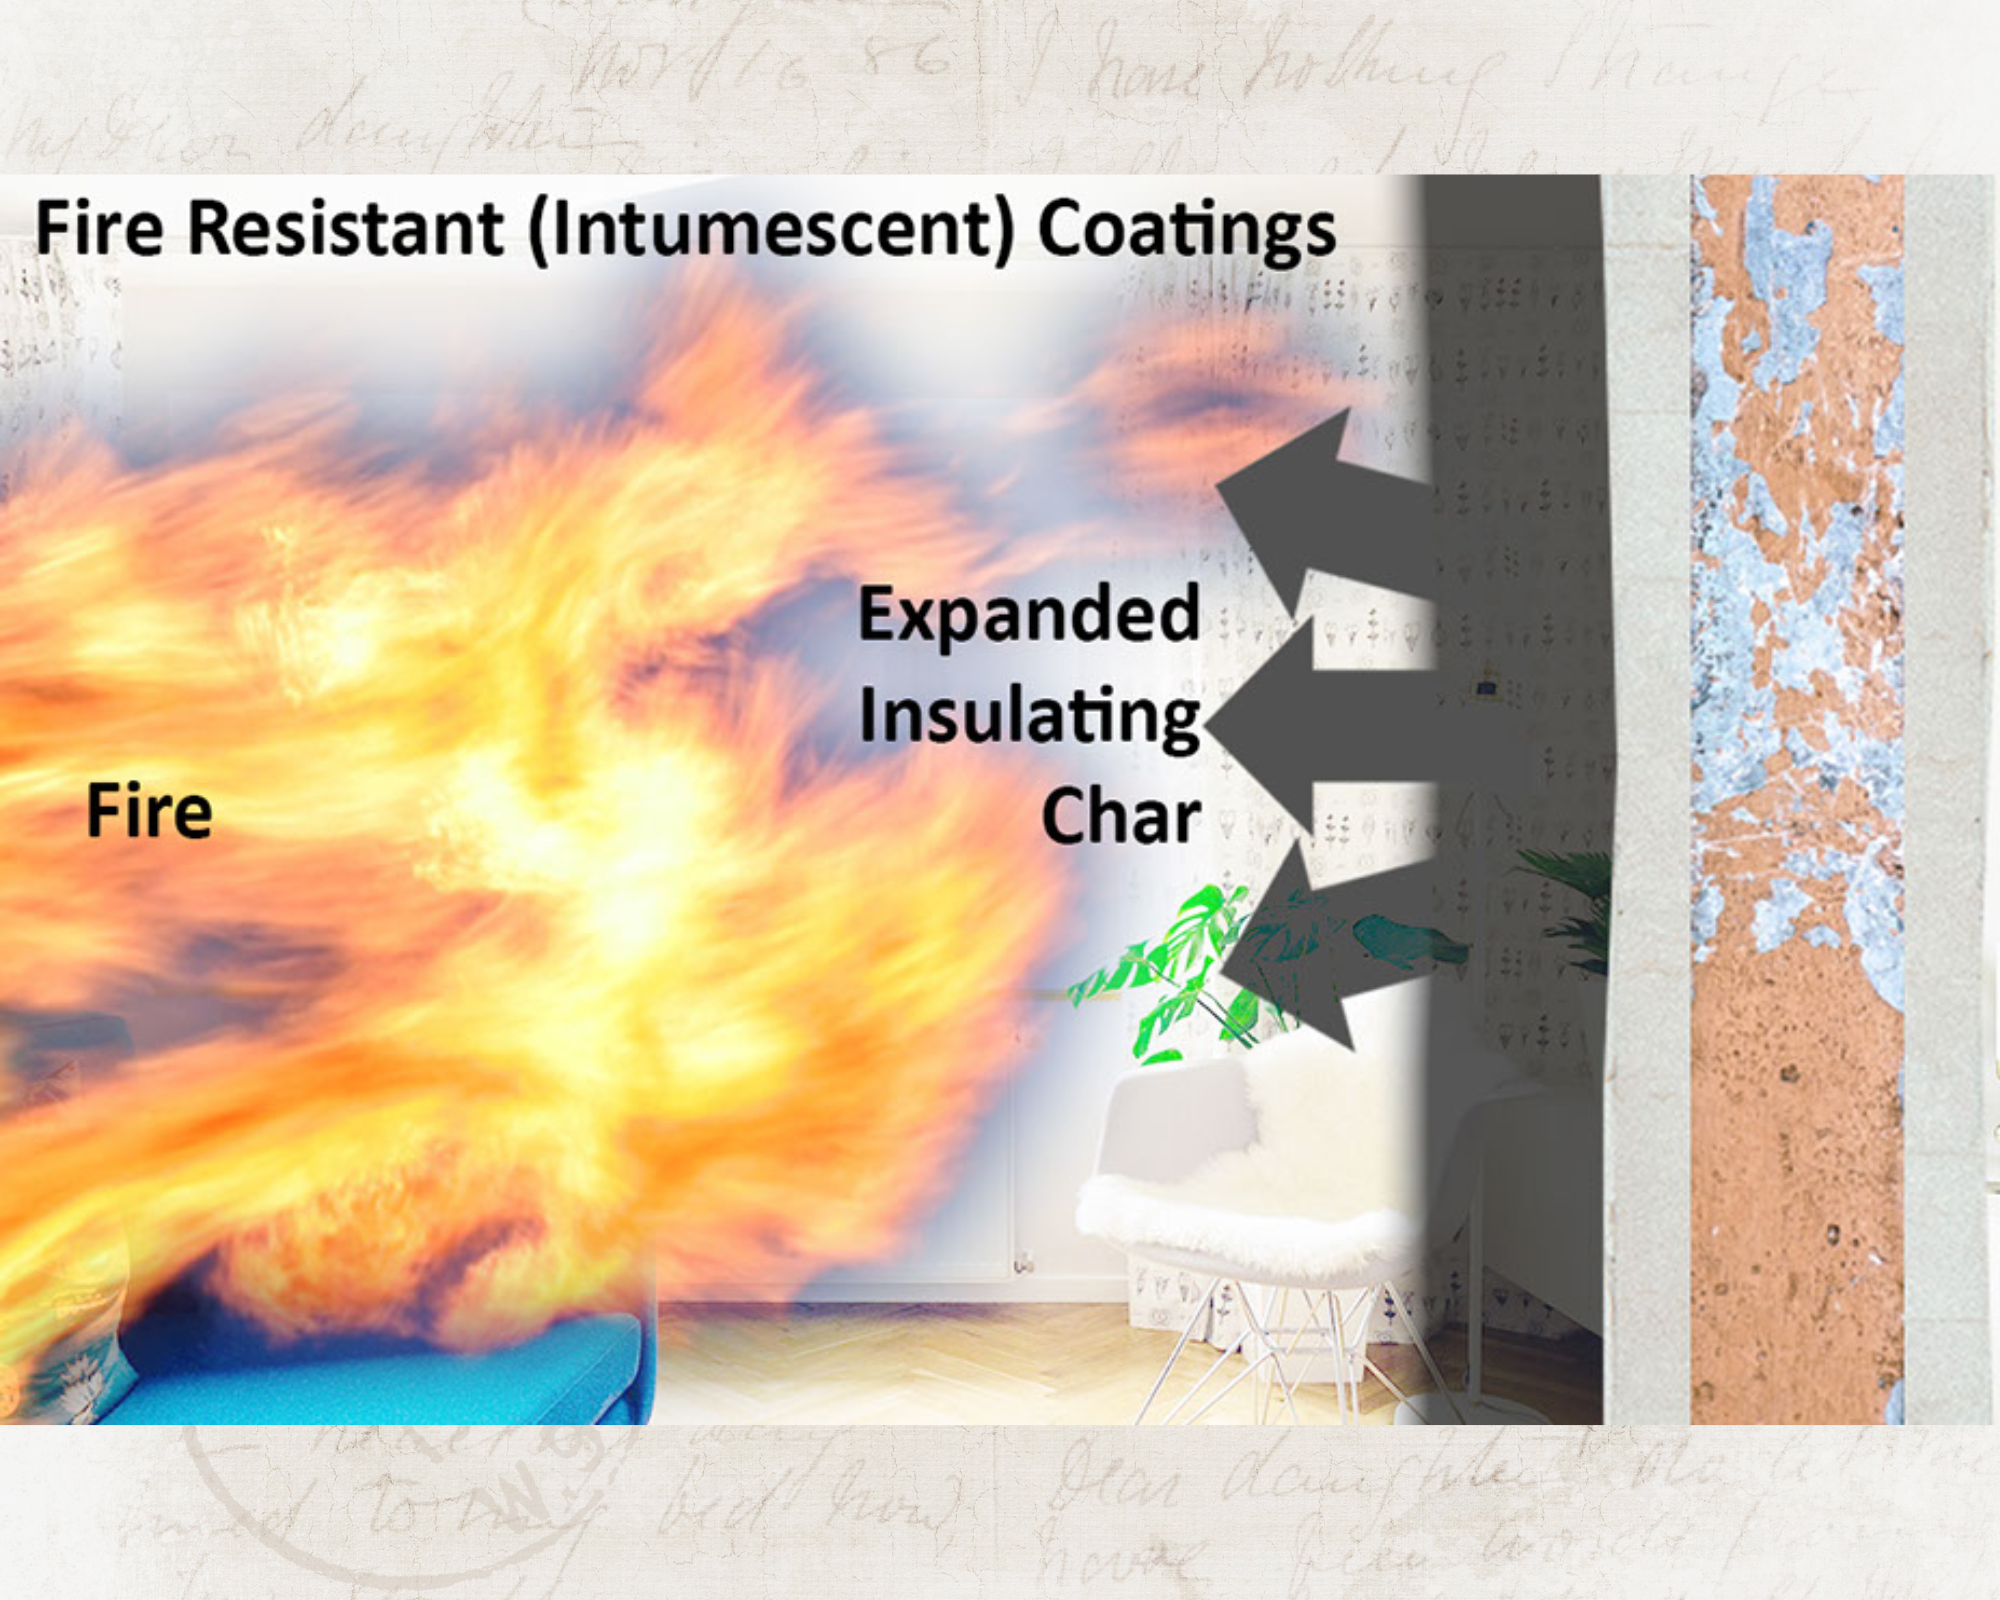 7.1 Coating and Painting Fire Protection_ Harnessing the Synergistic Effects of Intumescent Flame Retardants.png